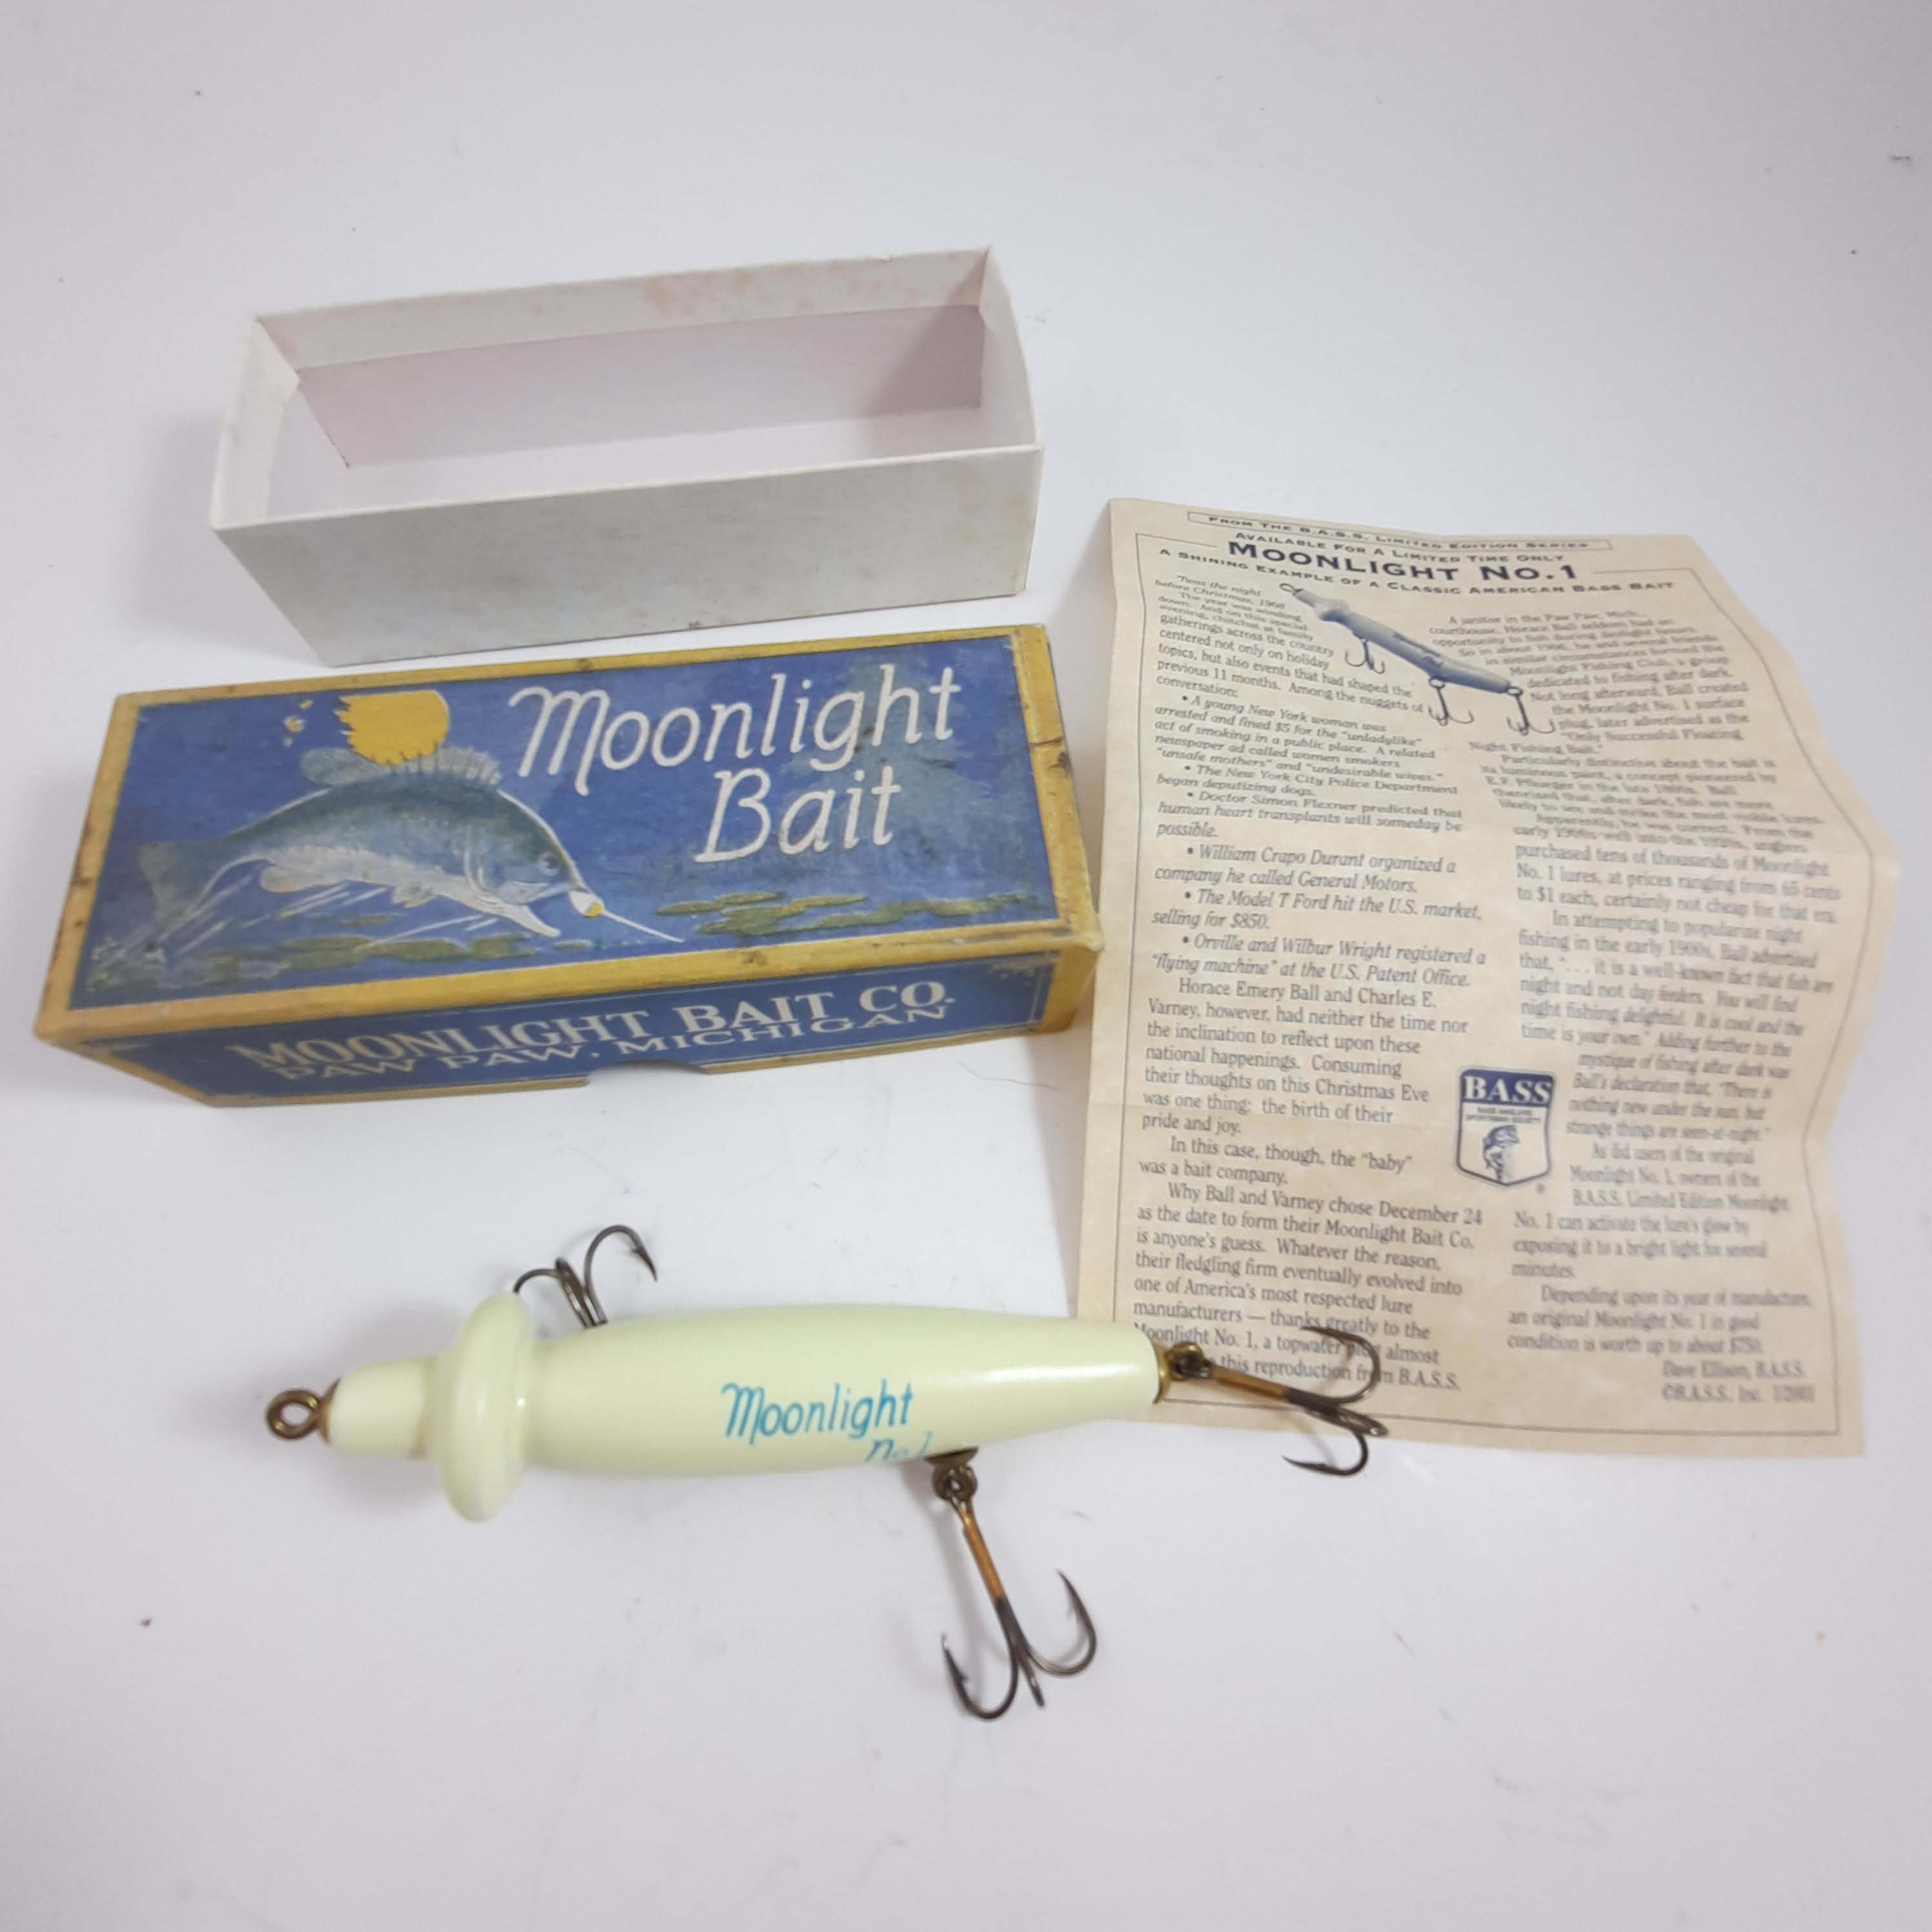 Moonlight Bait No 1 Lure with box and Paperwk